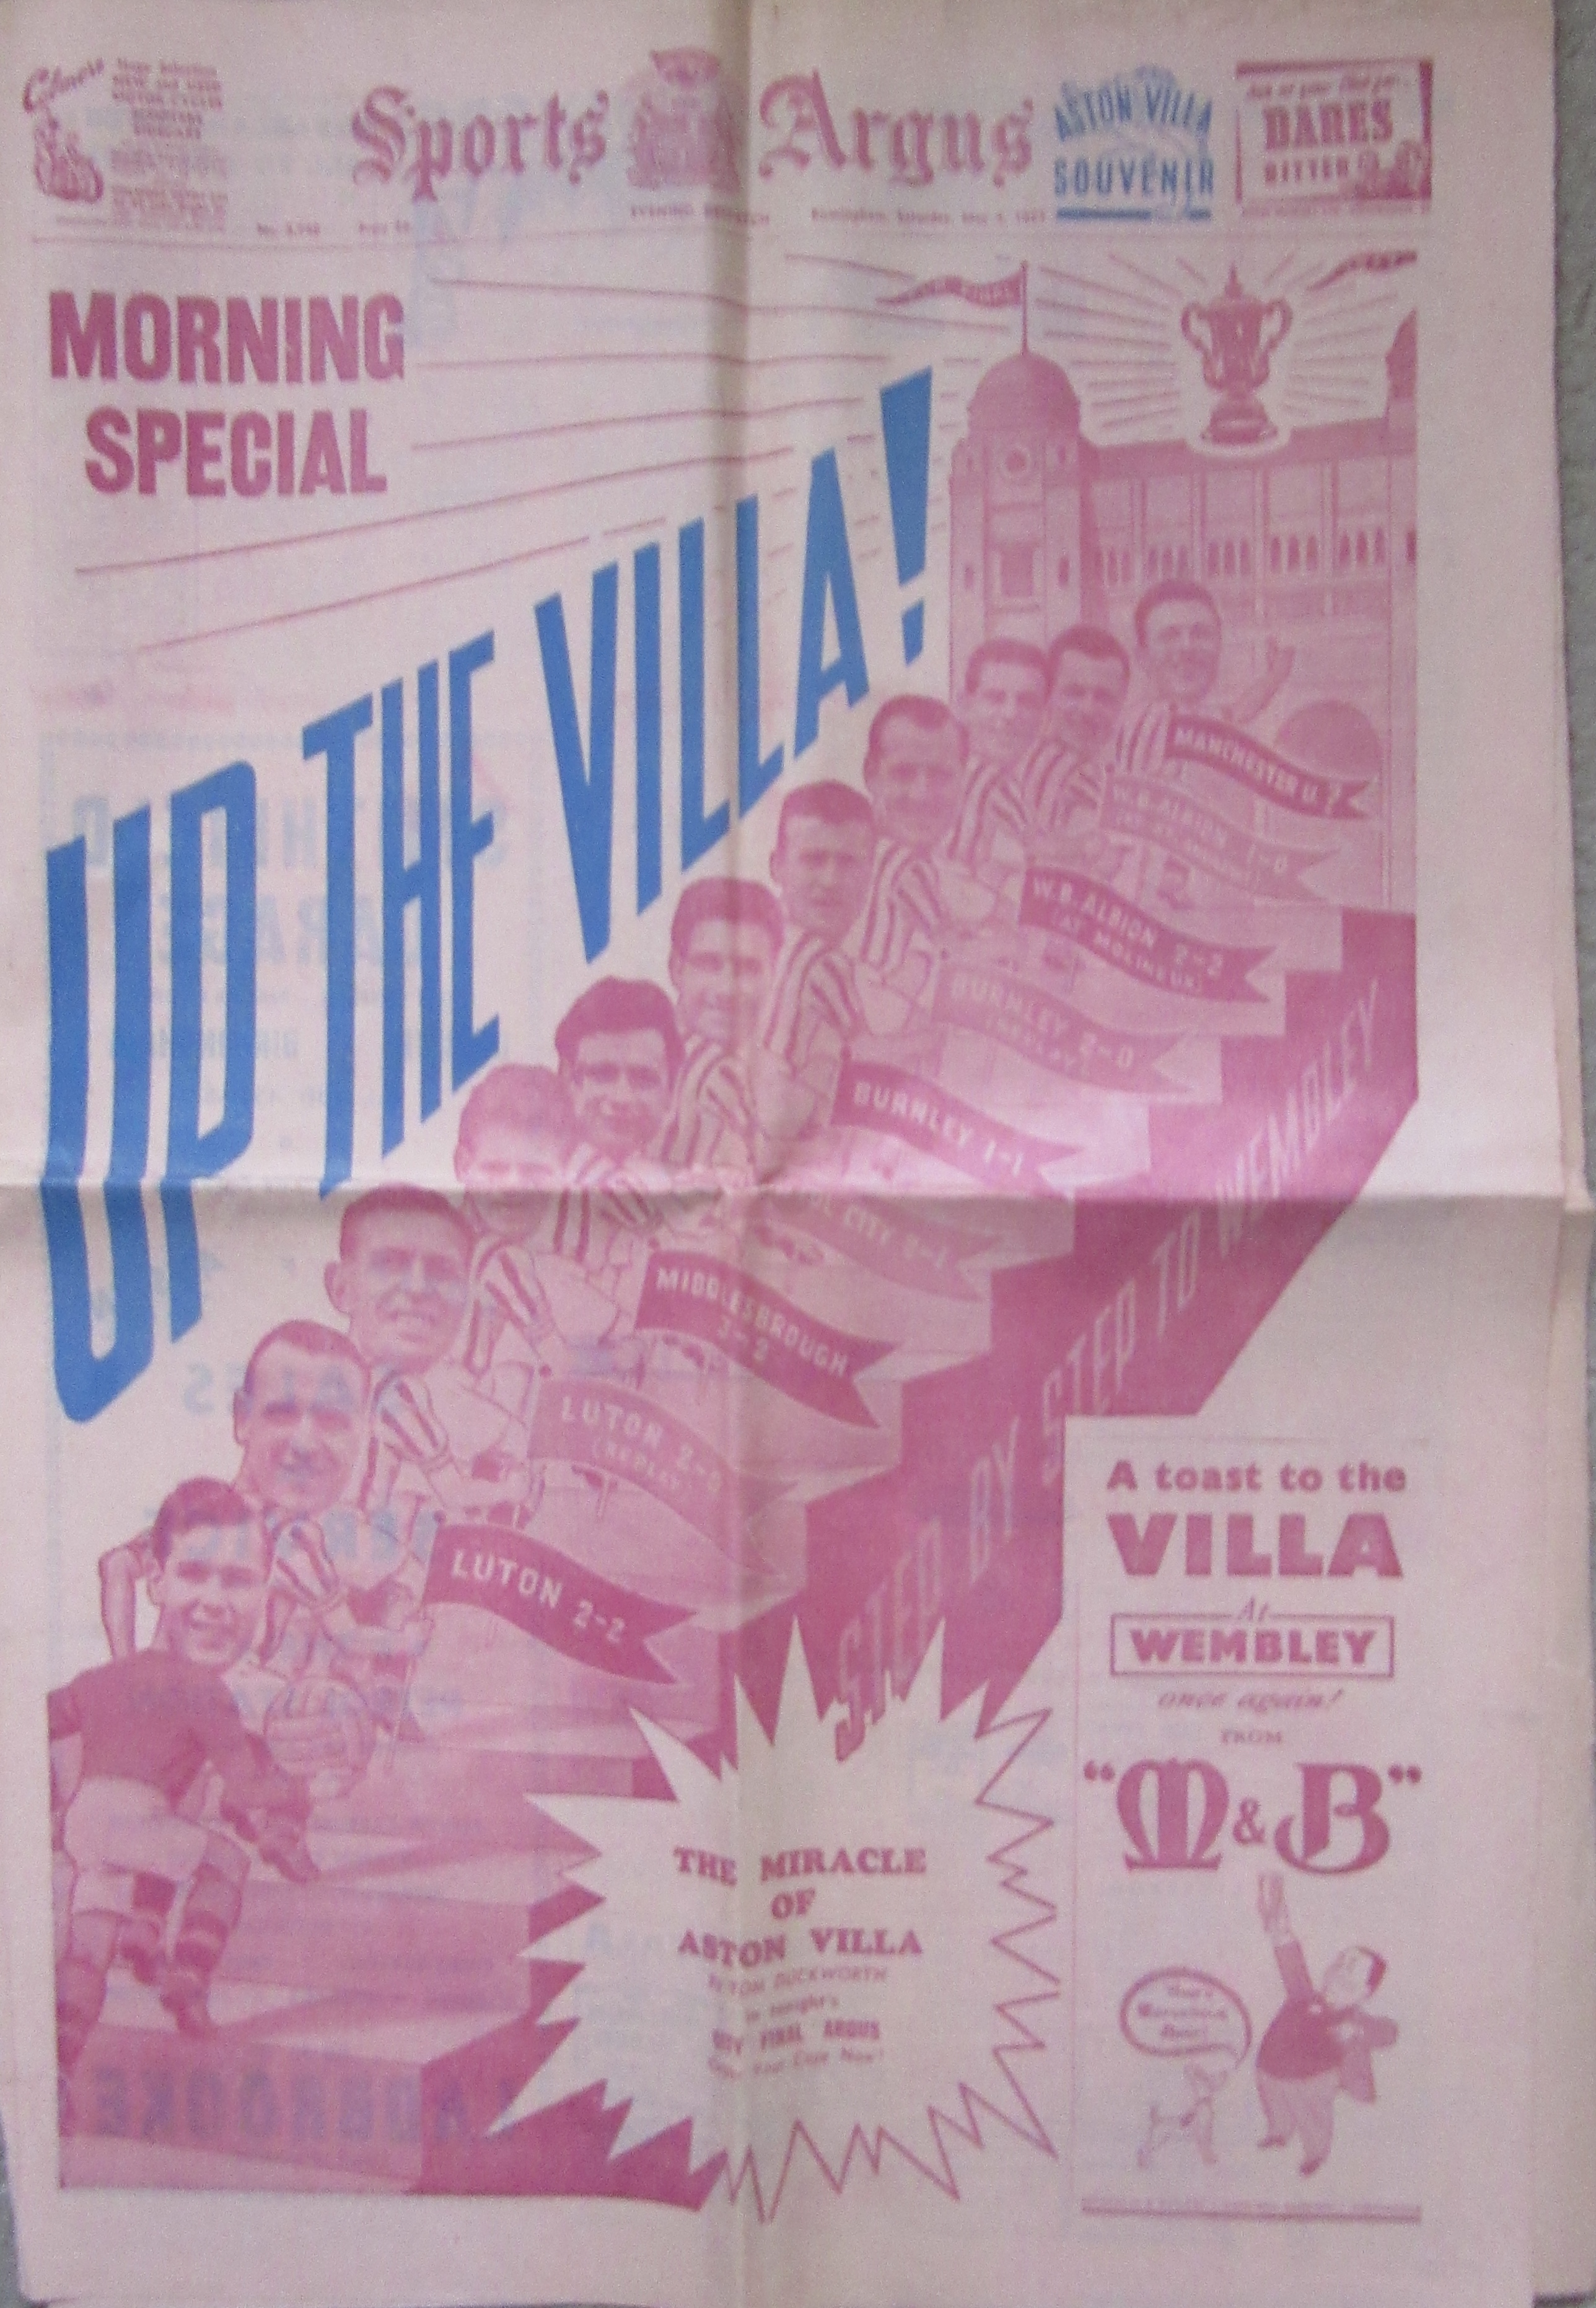 1957 FA CUP FINAL ASTON VILLA V MANCHESTER UNITED NEWSPAPERS X 3 - Image 3 of 3